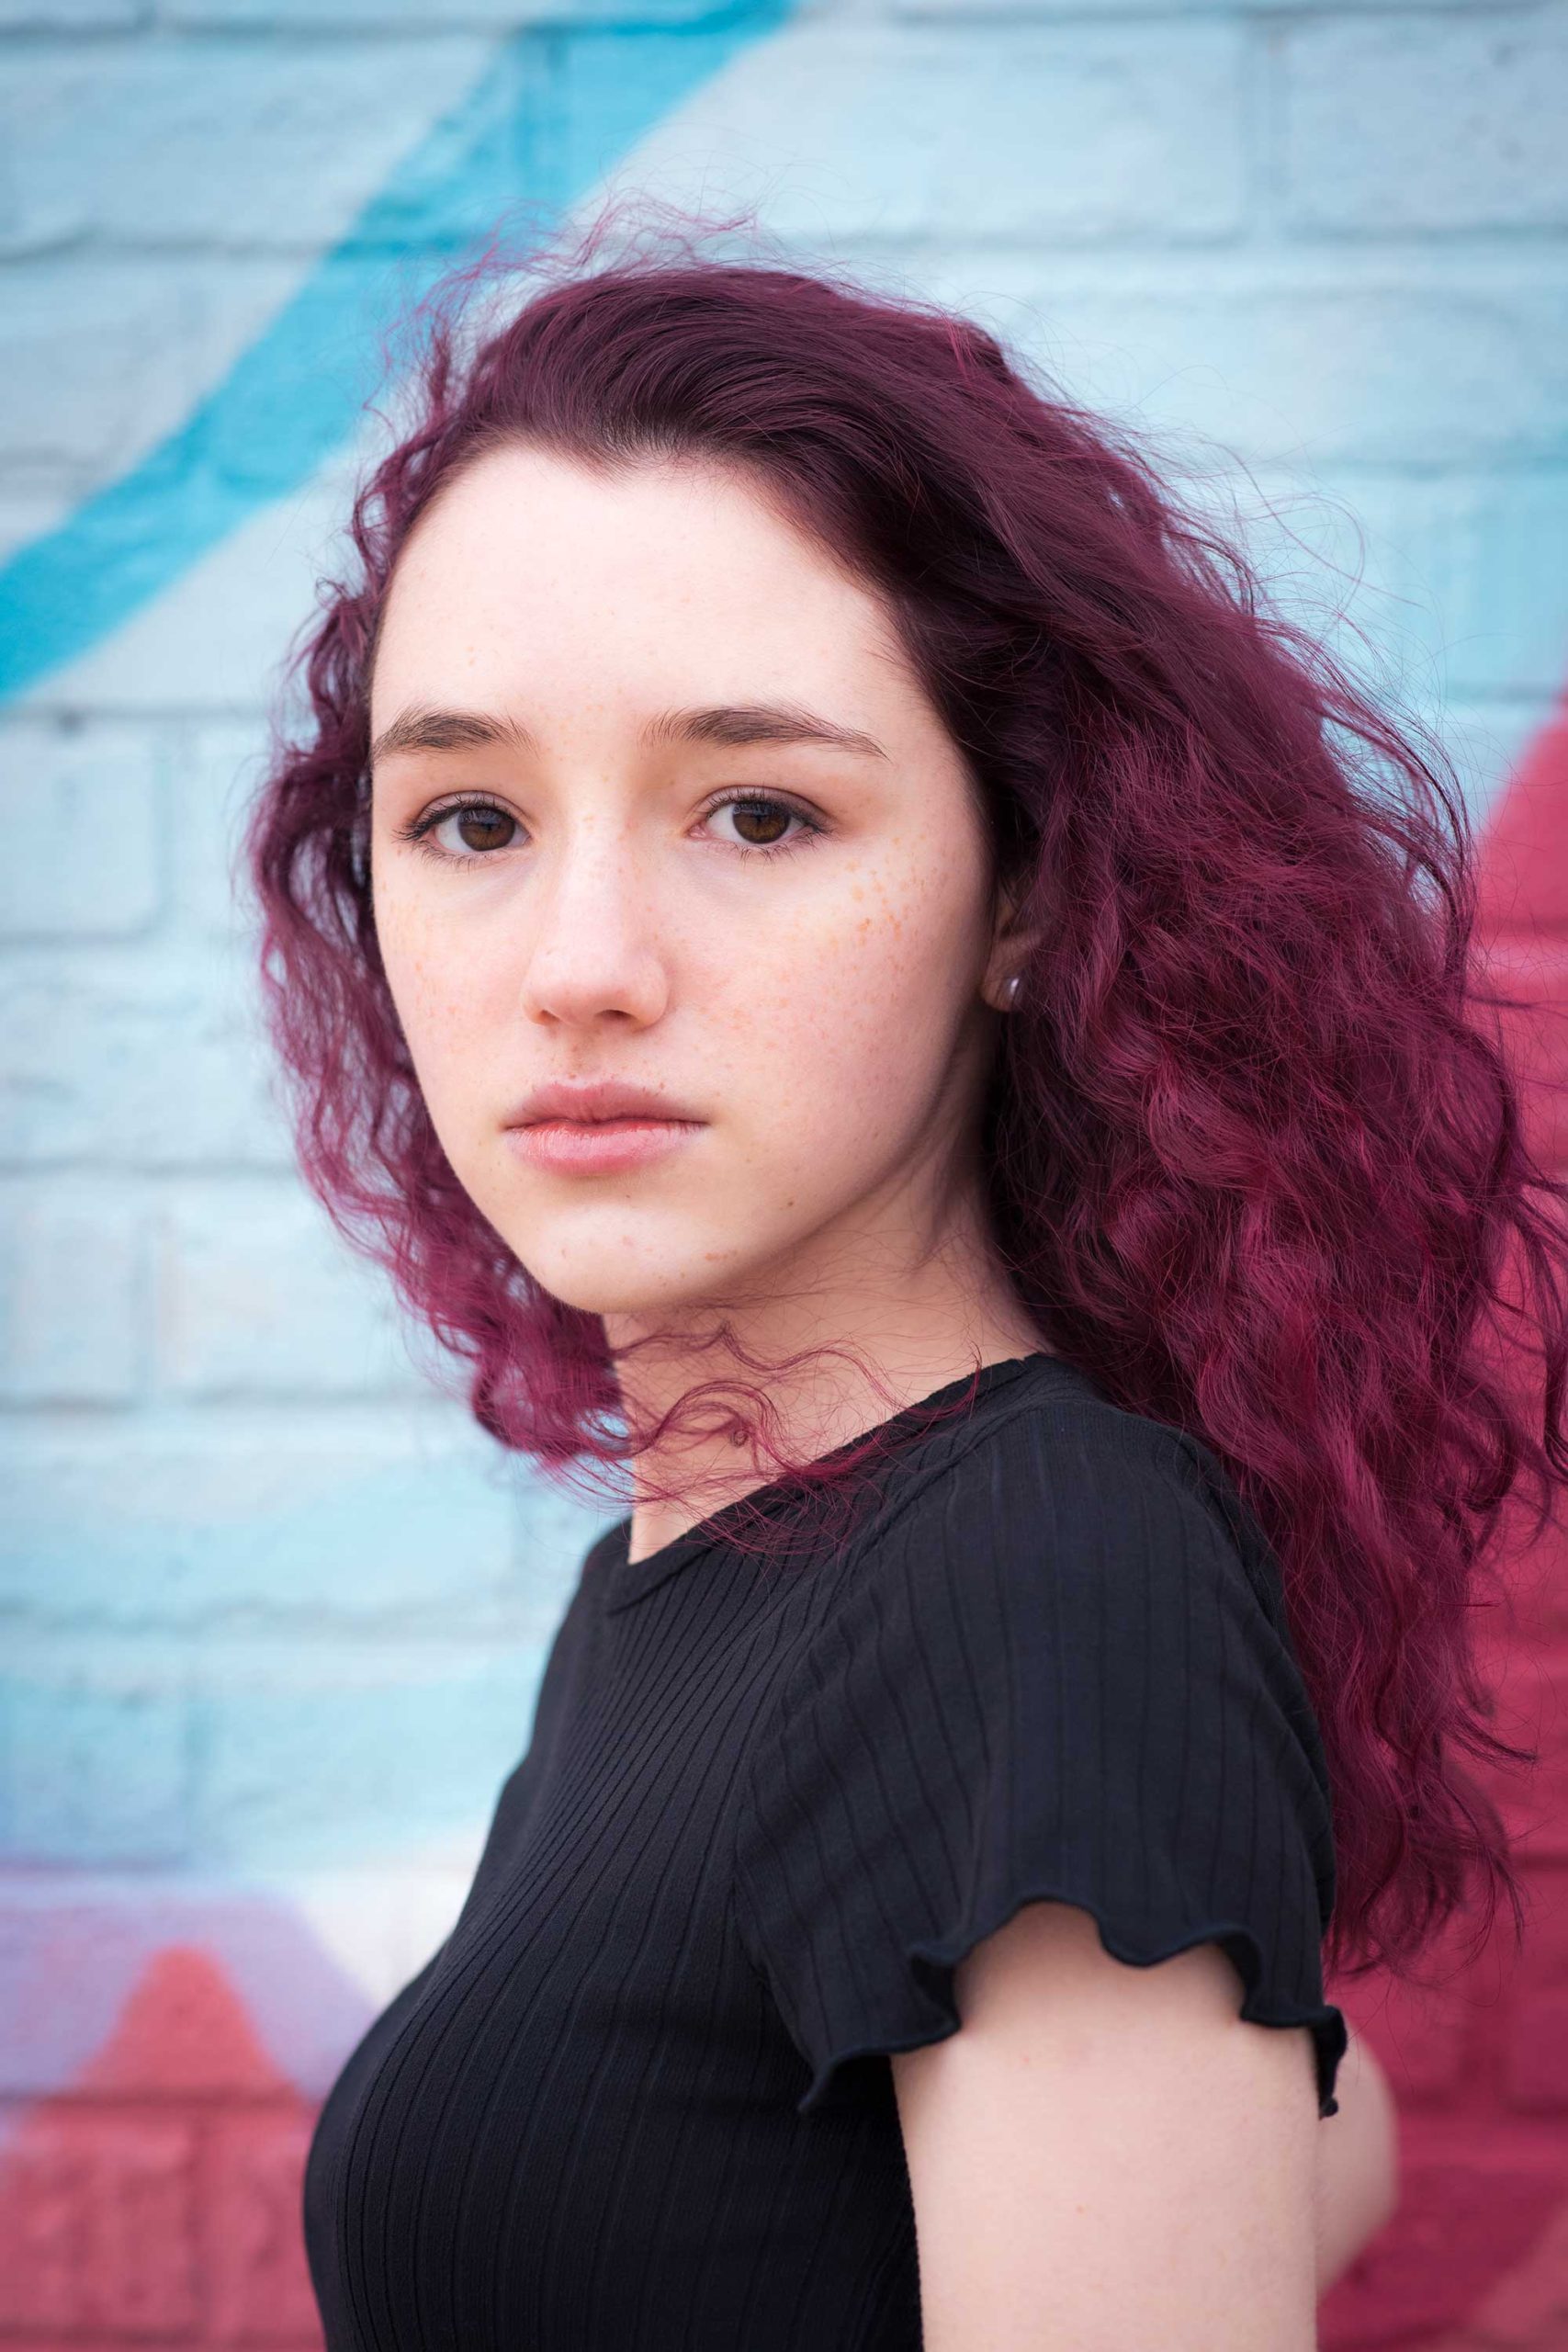 Teen girl with red colored hair against a graffiti wall.